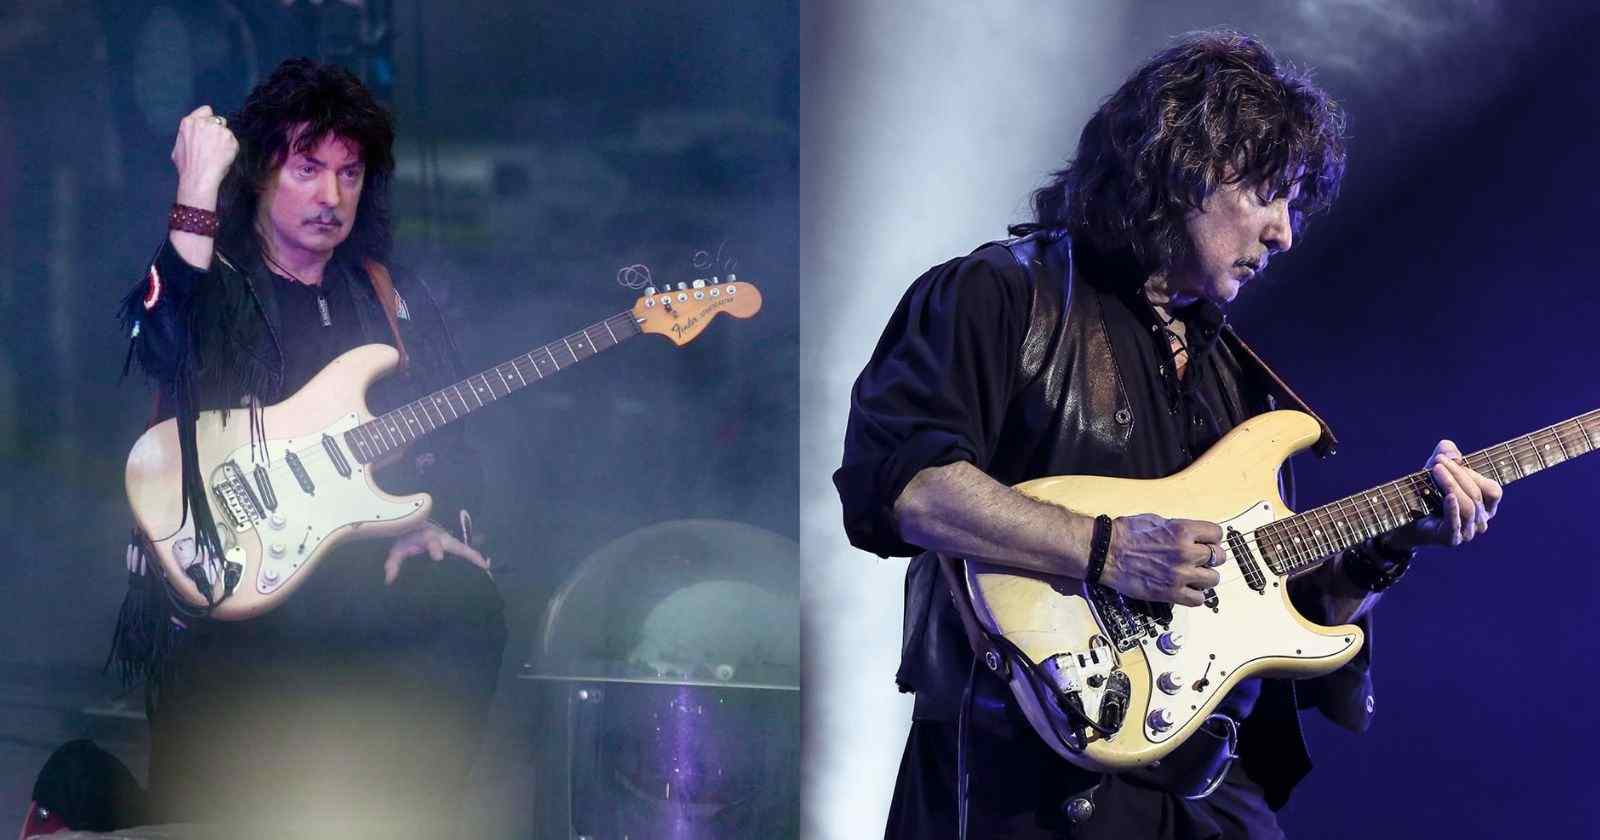 The guitarist and the singer that Ritchie Blackmore said he likes